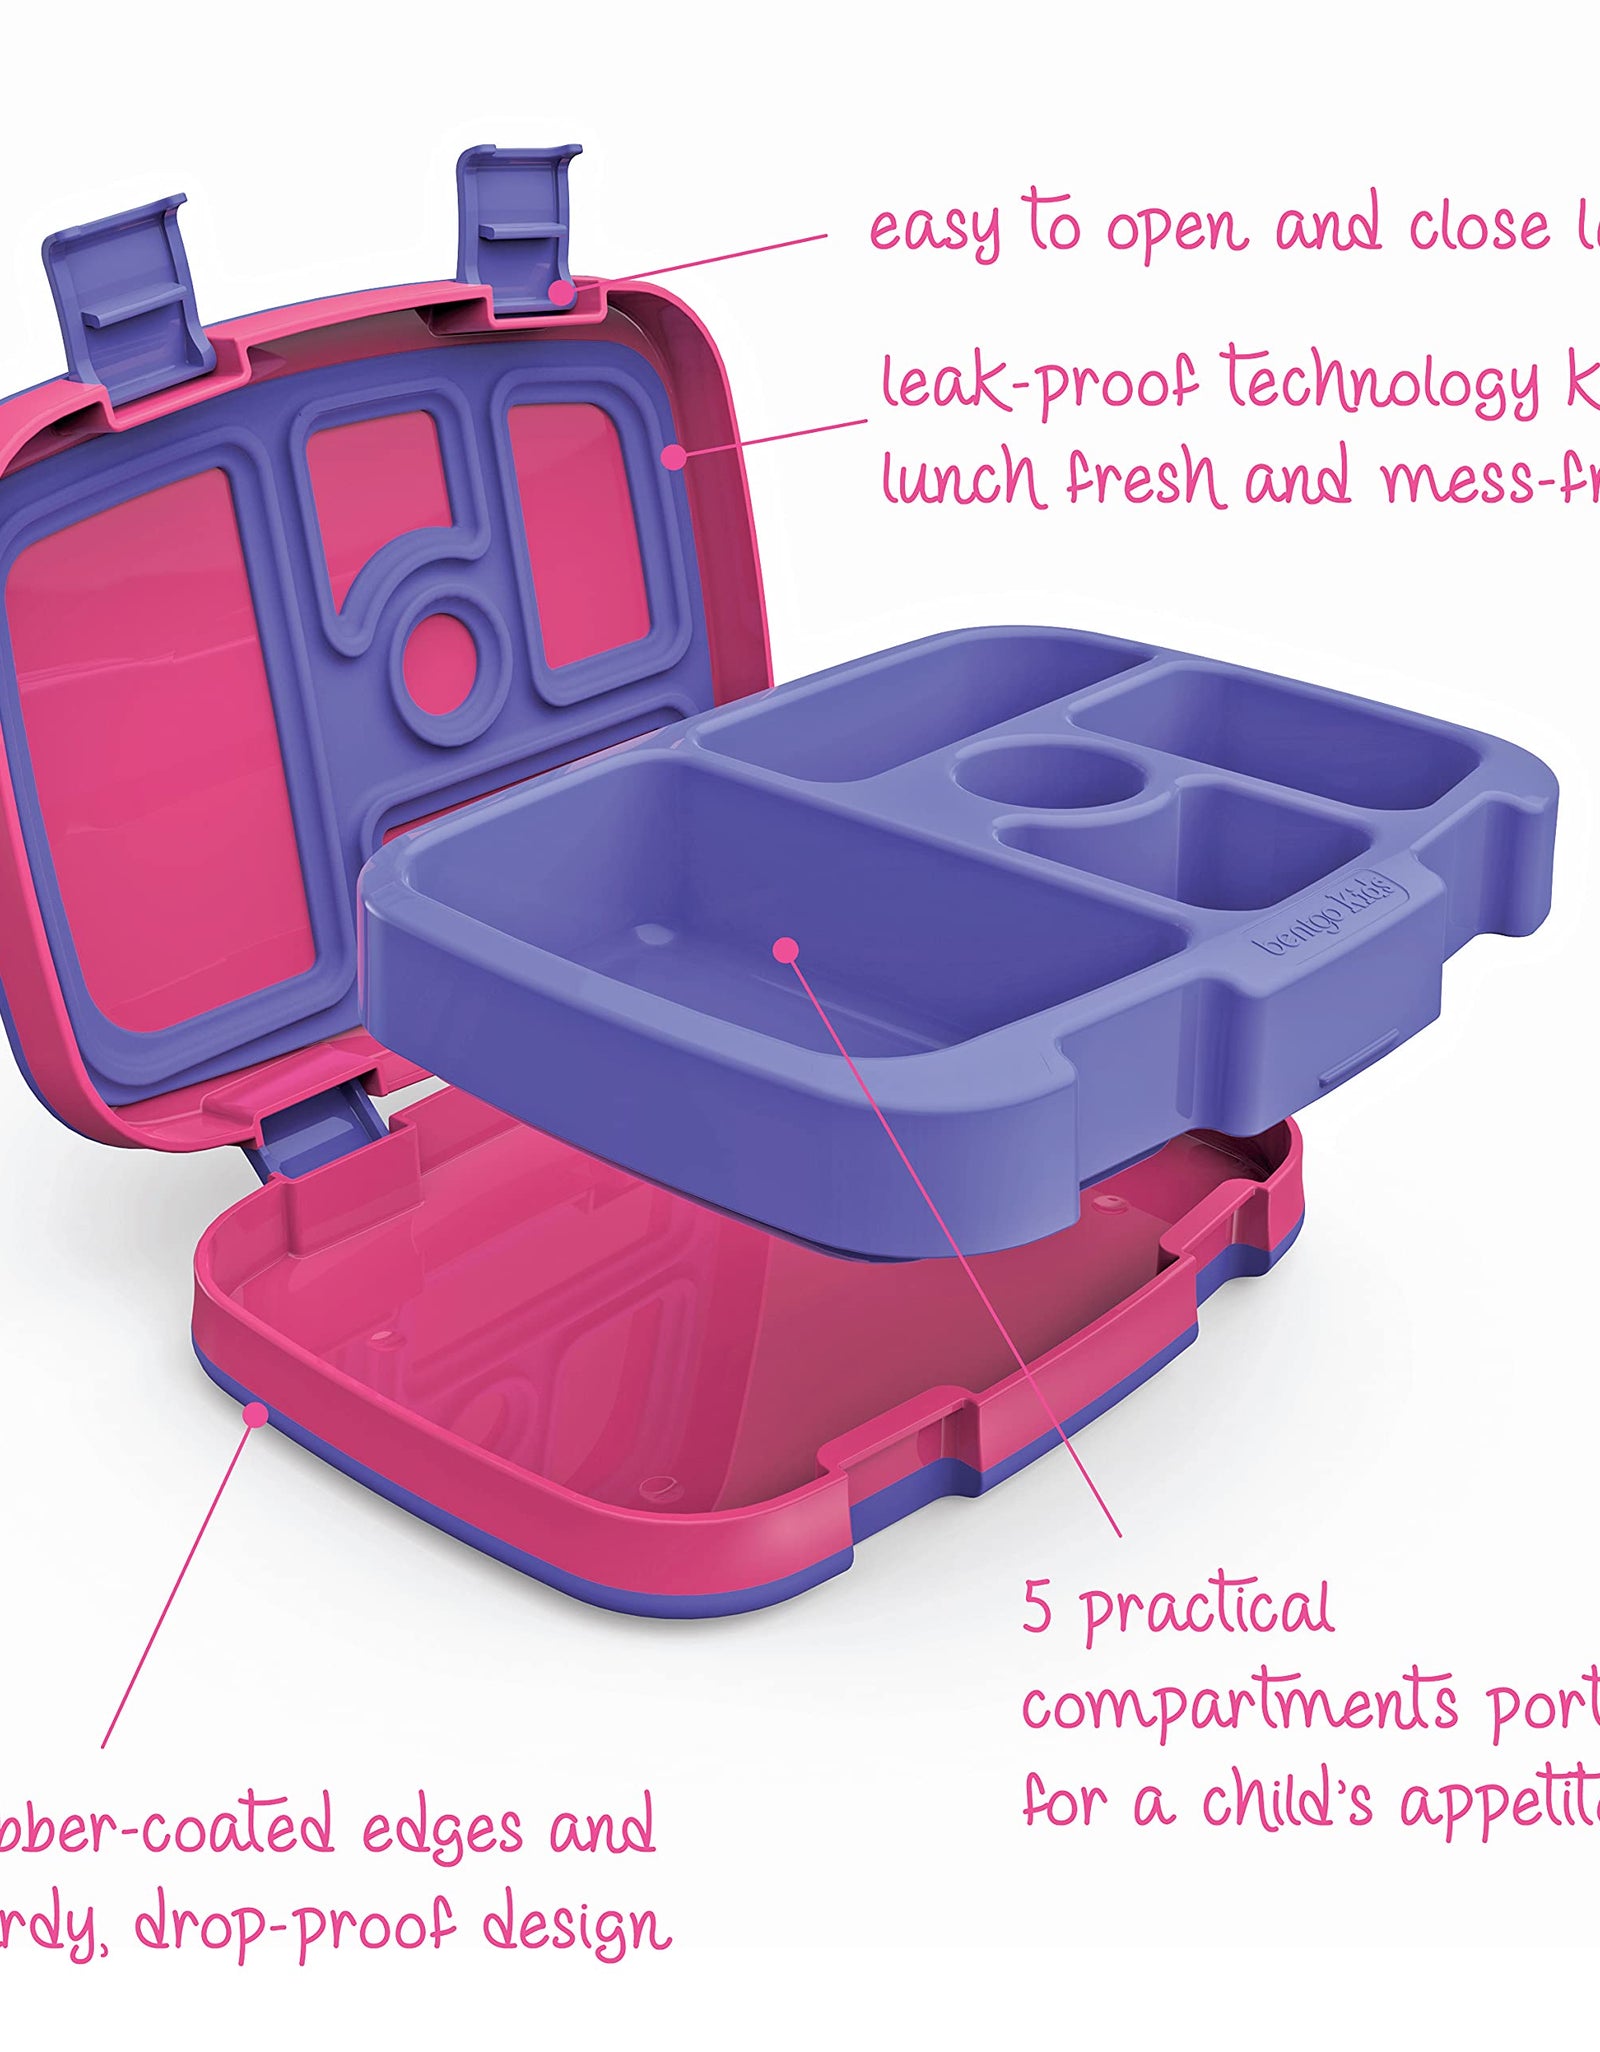 Bentgo Kids Brights – Leak-Proof, 5-Compartment Bento-Style Kids Lunch Box – Ideal Portion Sizes for Ages 3 to 7 – BPA-Free, Dishwasher Safe, Food-Safe Materials (Fuchsia)